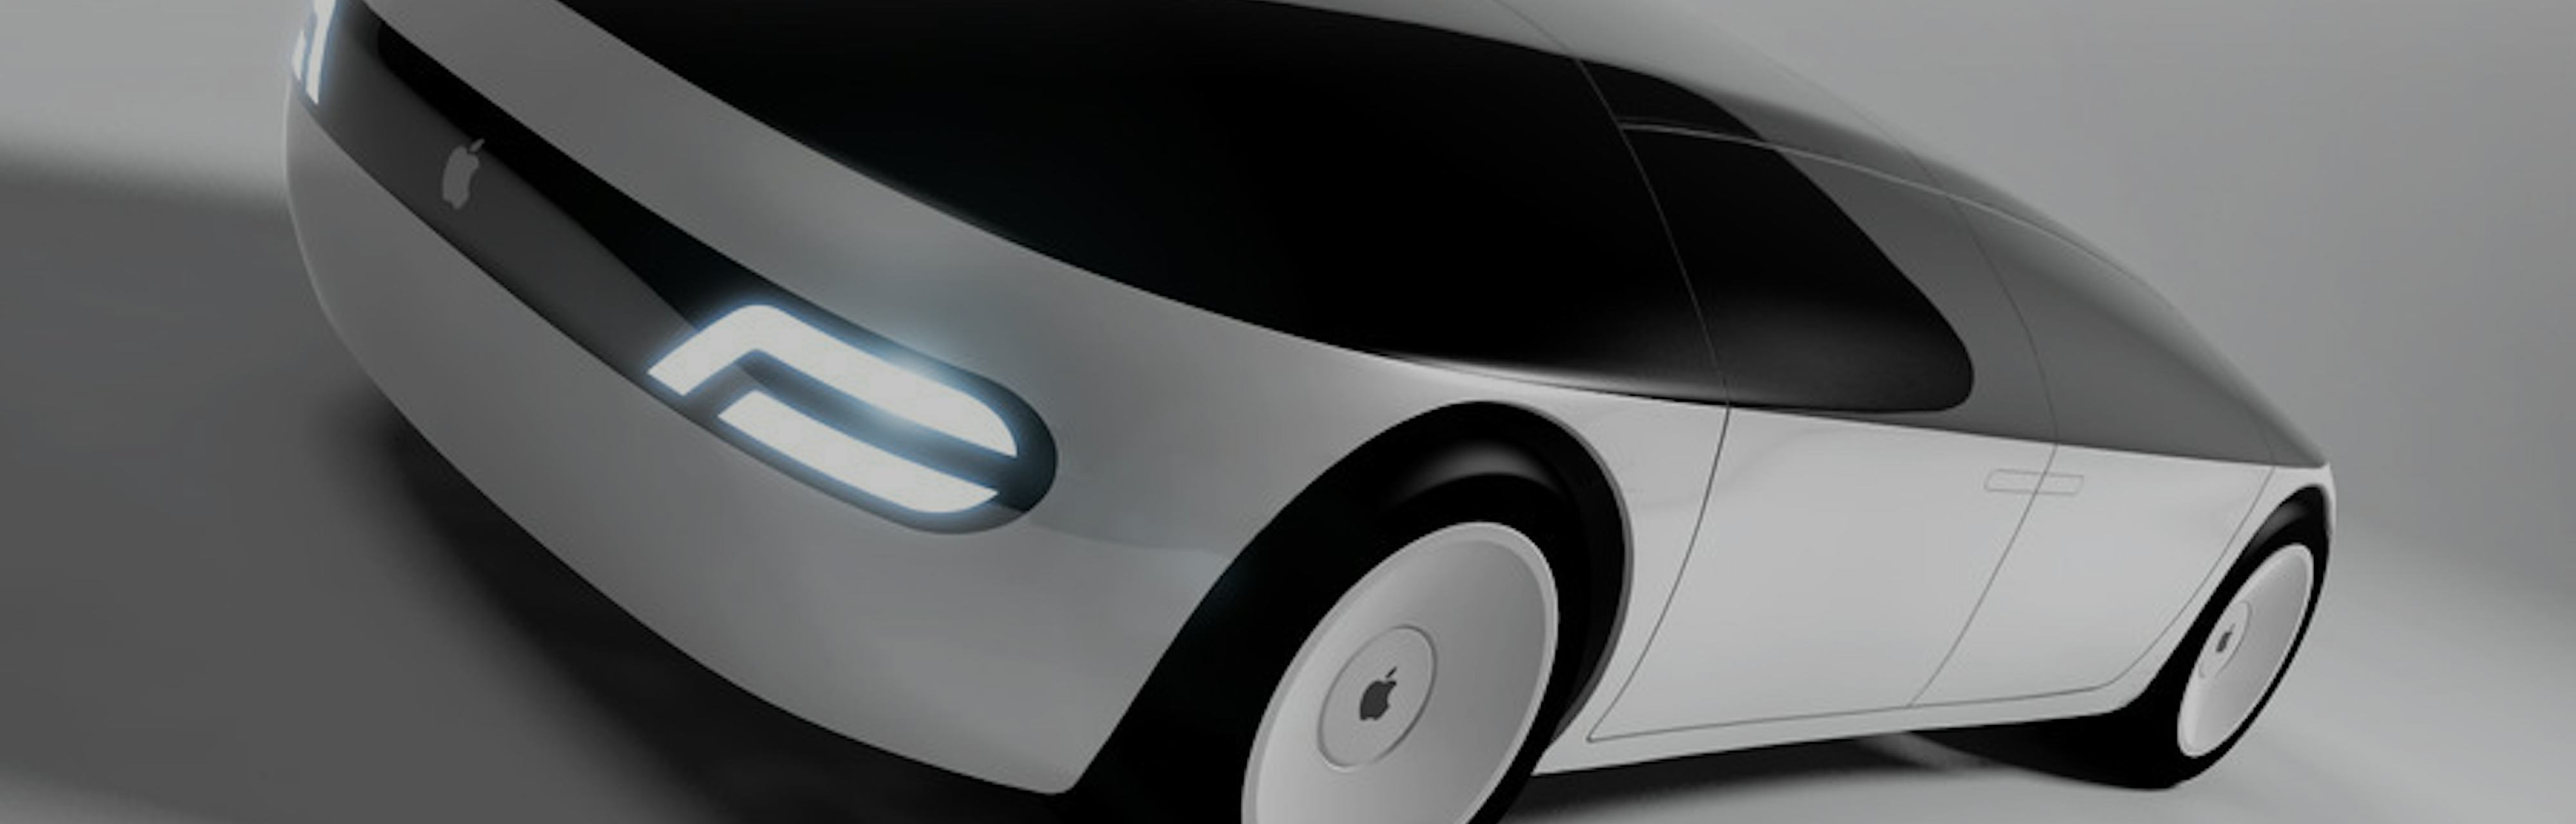 Apple Car Release Date, Price, & Features for the Mysterious Project Titan